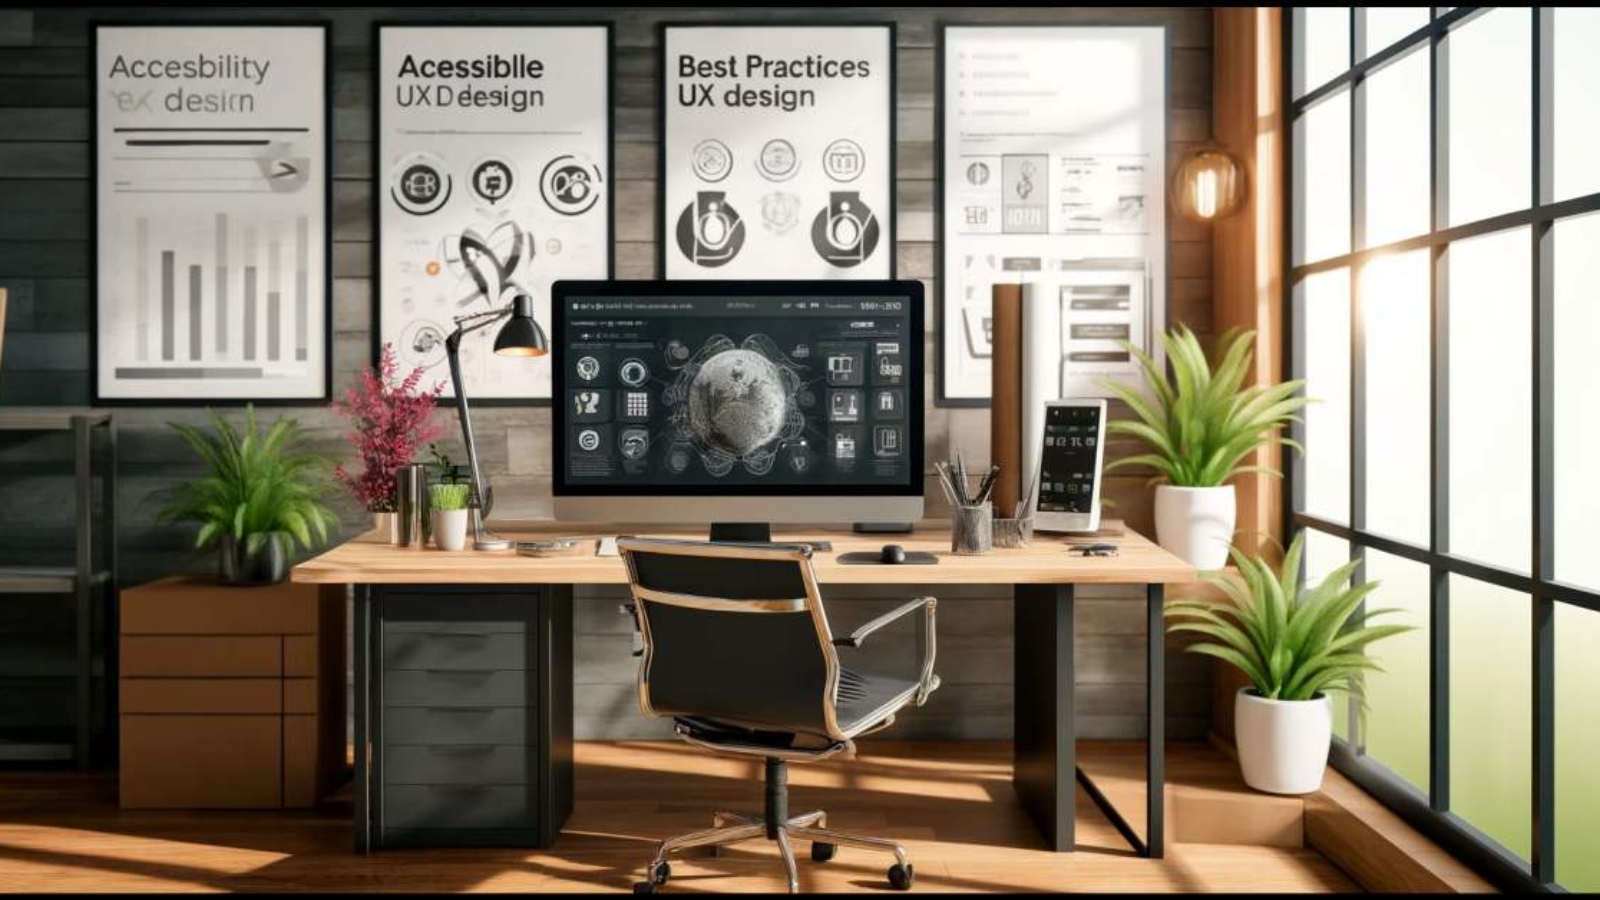 The image of a professional workspace, and the setup highlights a spacious desk with tools and visuals dedicated to UX design accessibility, set in a bright, eco-friendly environment.